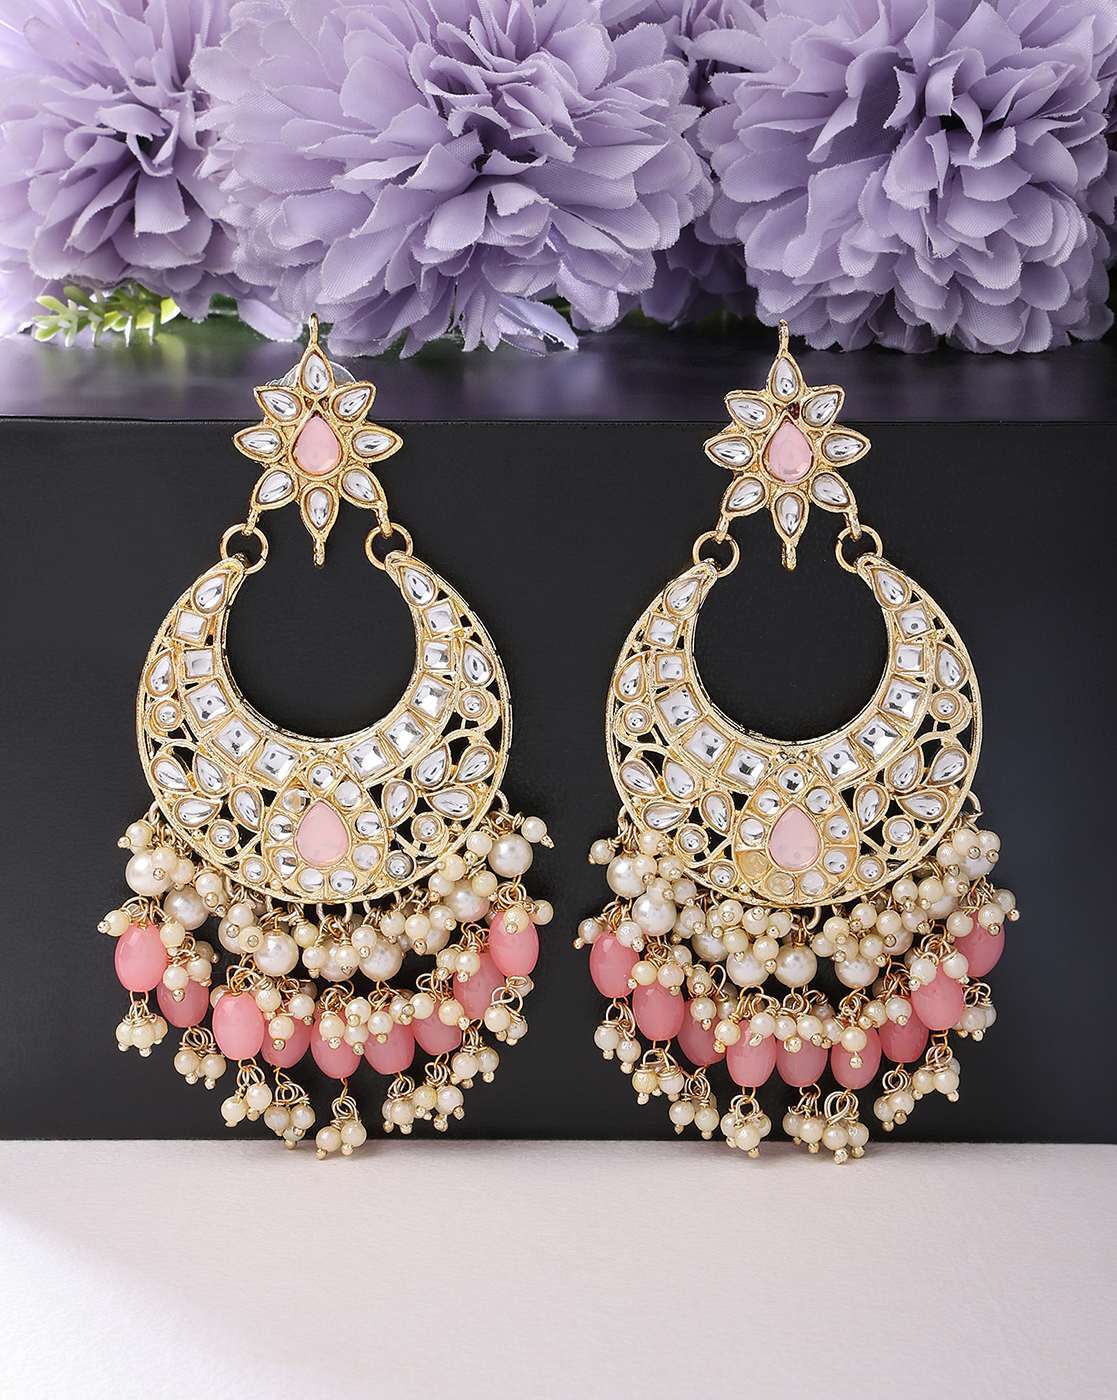 5 Adorable Pujo-Perfect Earrings for Your Little Princess – GIVA Jewellery